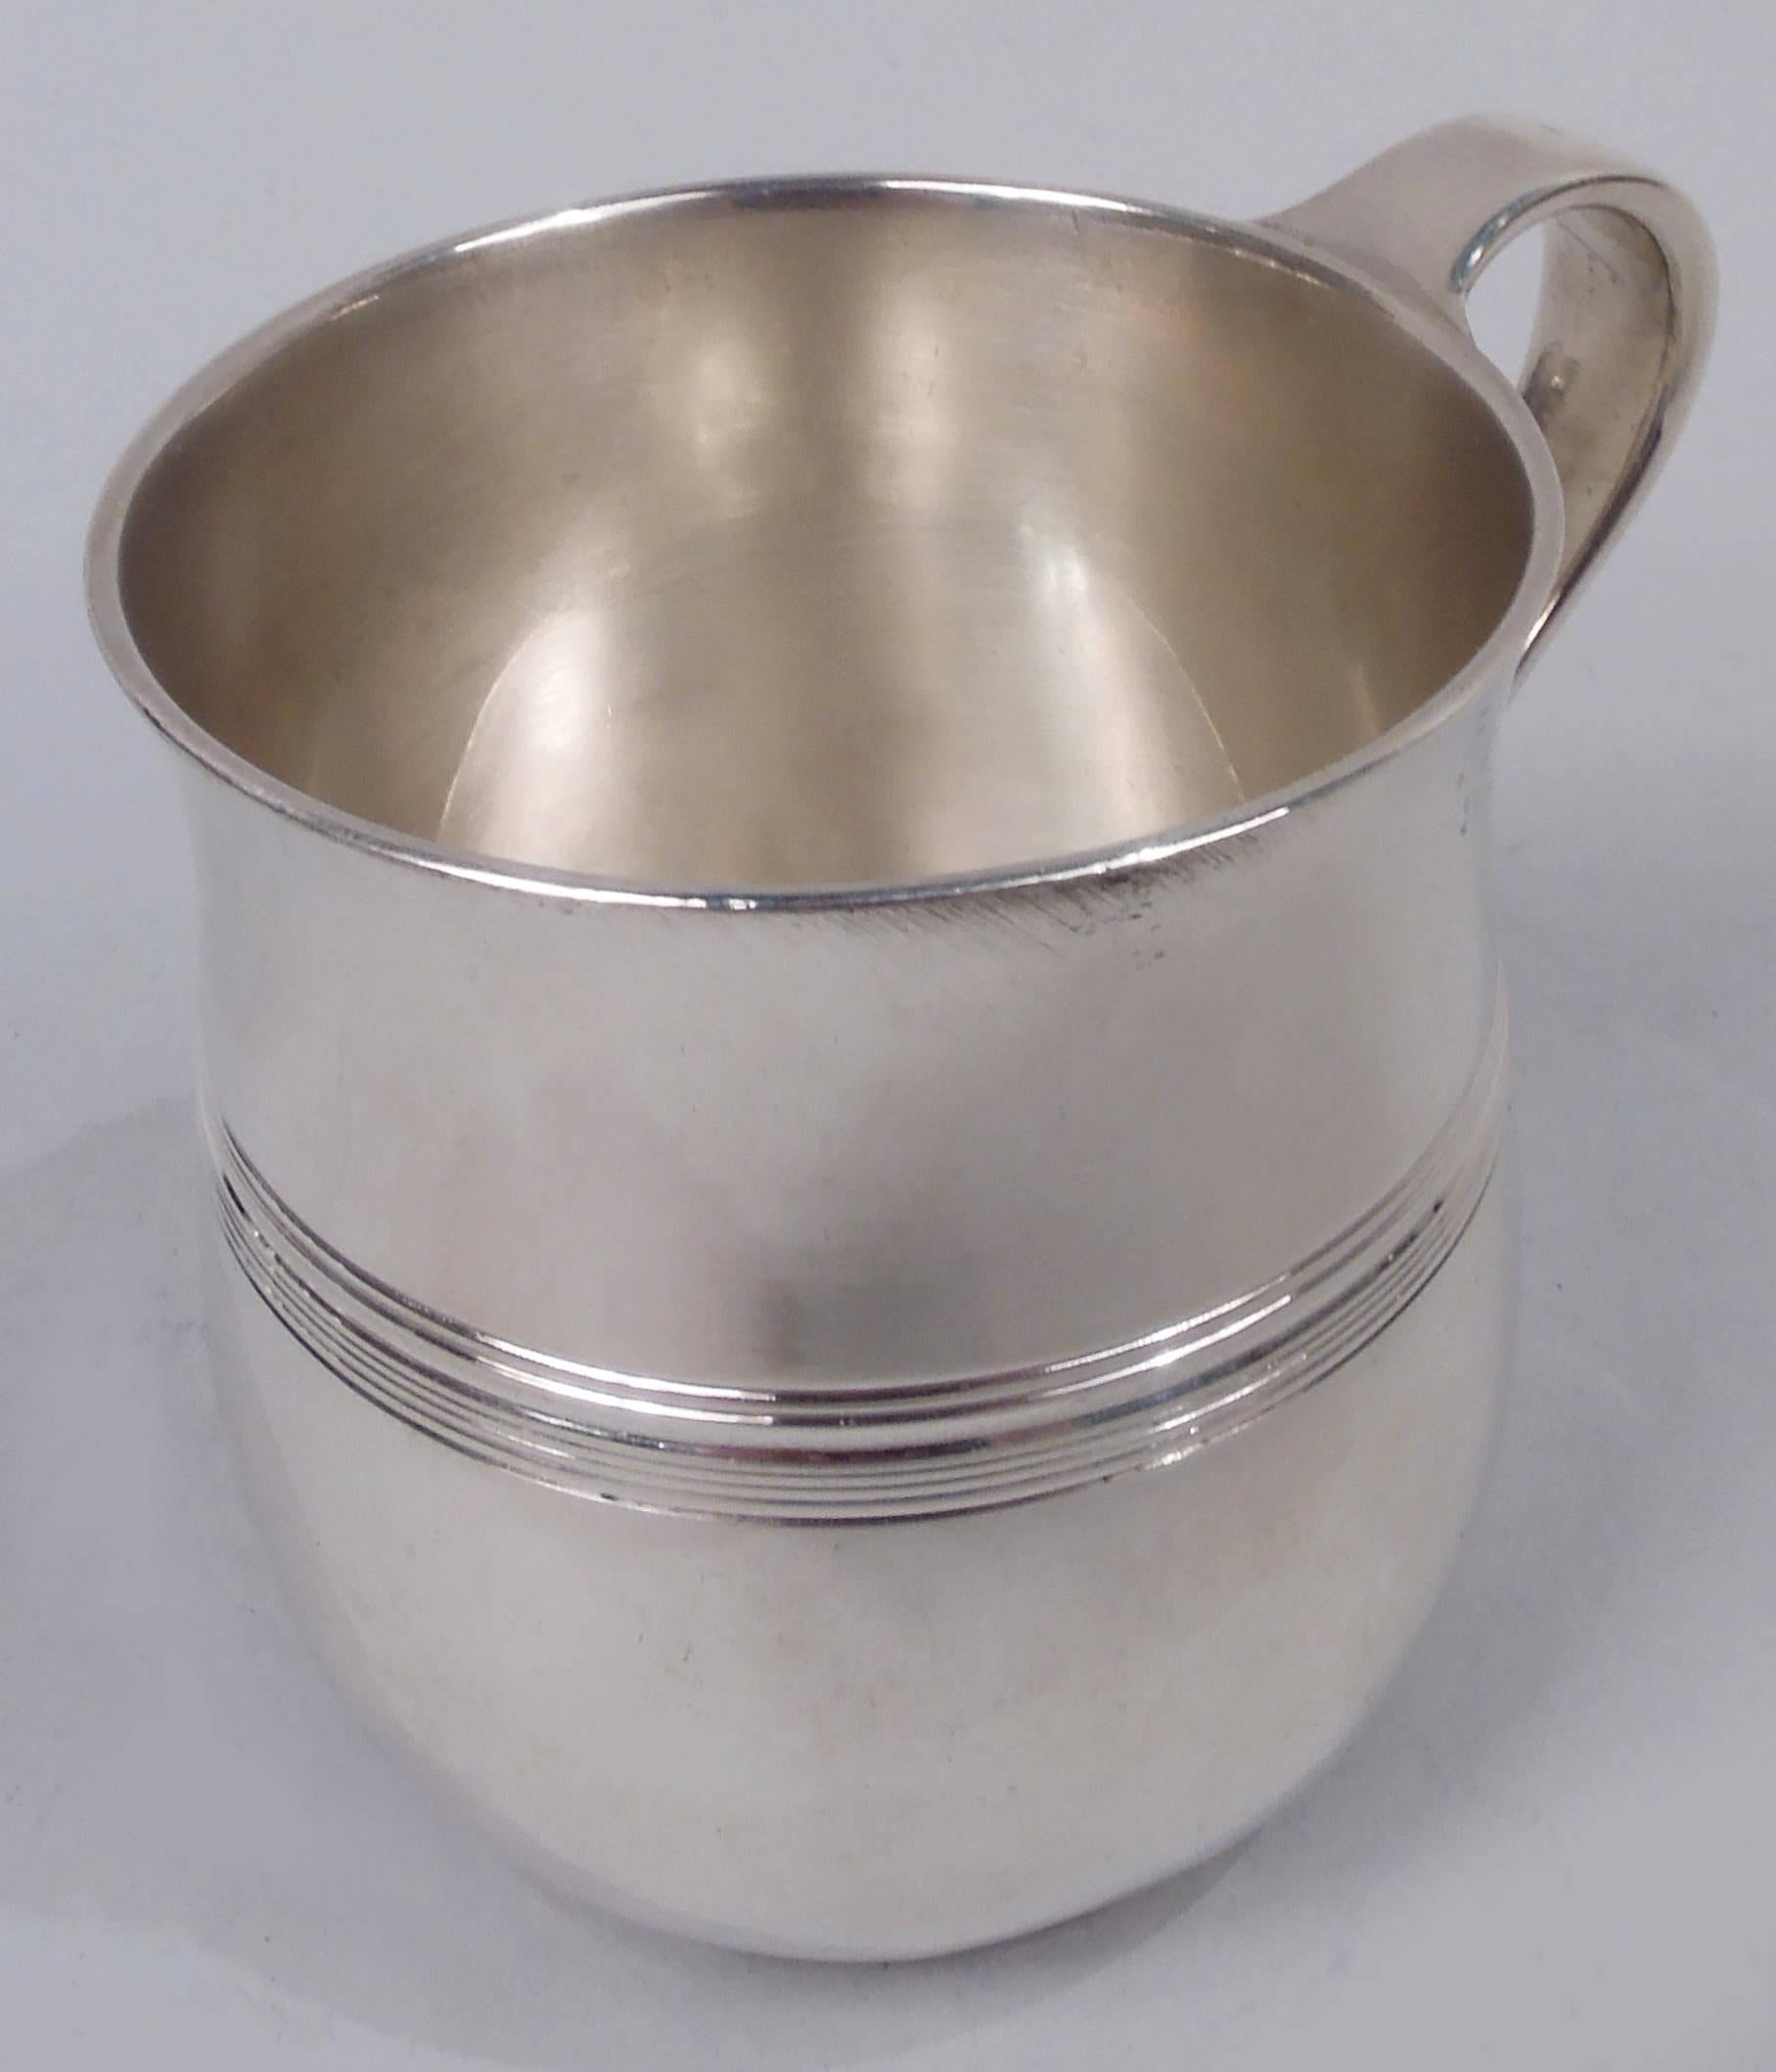 Modern sterling silver baby cup. Made by Tiffany & Co. in New York, ca 1928. Curved bowl with flared mouth rim, high-looping handle, and foot ring; reeded band. Plenty of room for engraving. Fully marked including maker’s stamp, pattern no. 21213